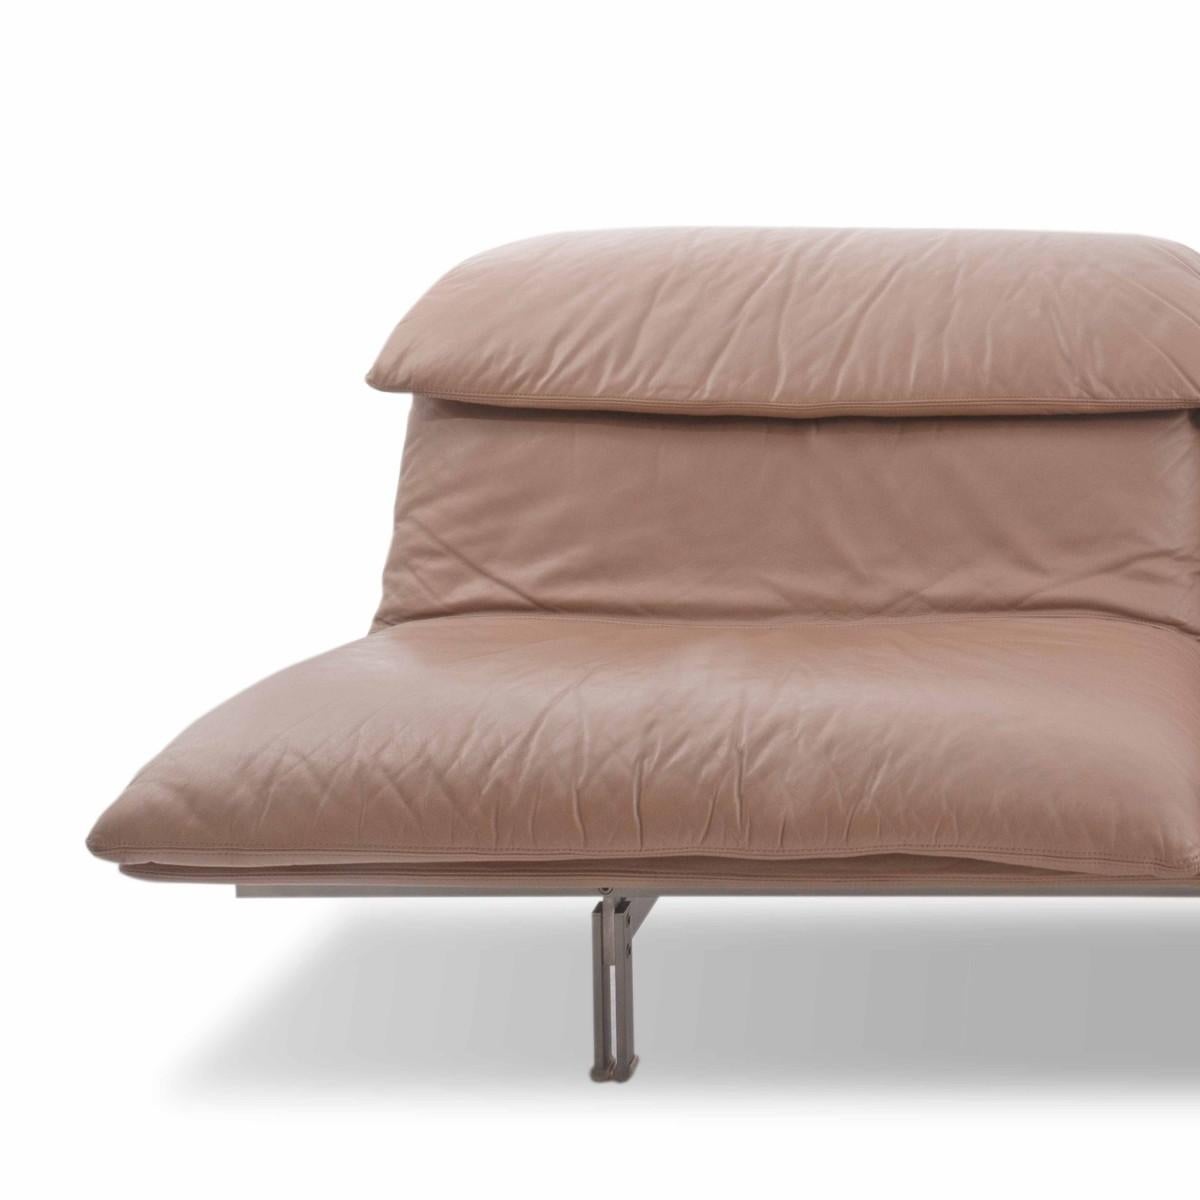 Saporiti 'Wave' loveseat by Giovanni Offredi with tan leather upholstery, circa 1970, early 1980s, 

Measures: Seat height 16.5